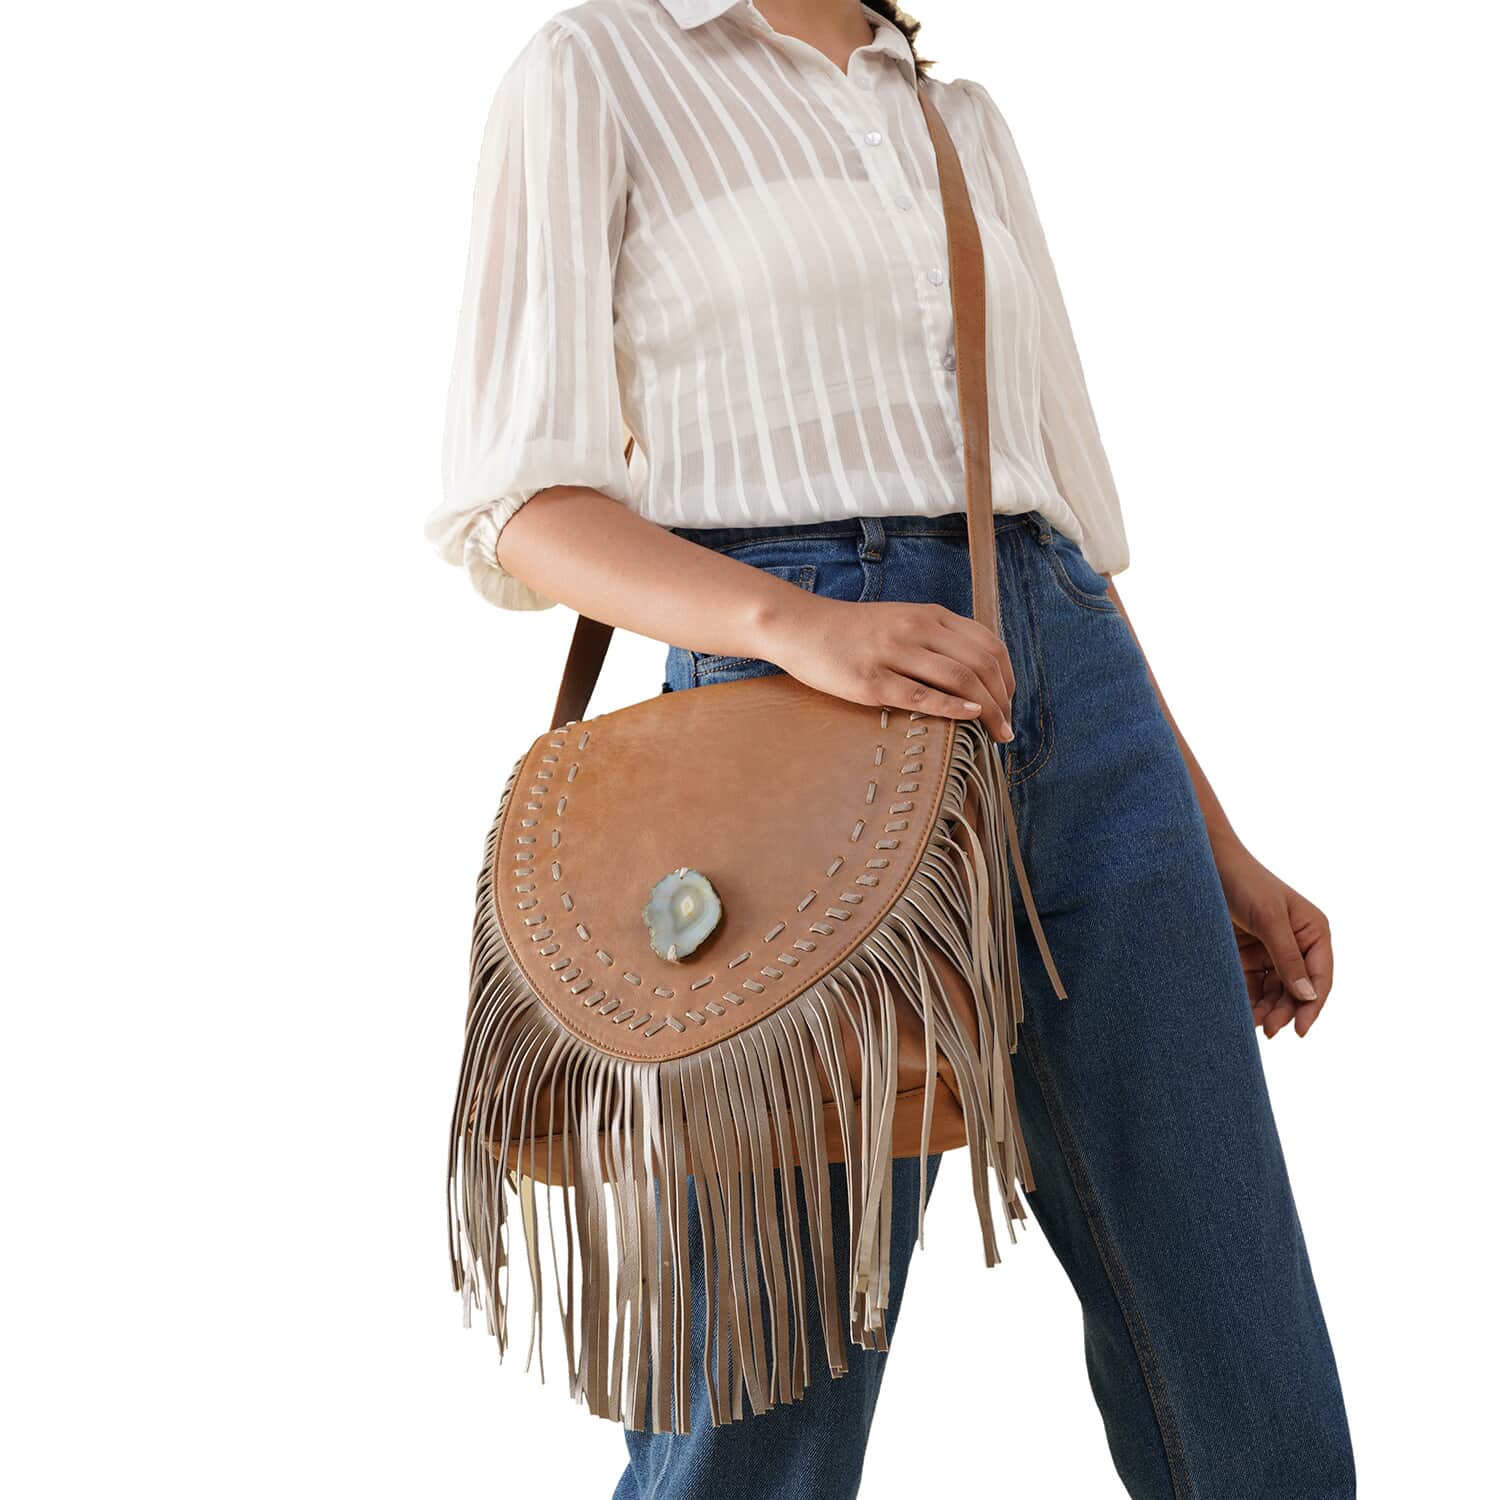 Tan Genuine Leather Fringes Crossbody Bag with Agate Stone